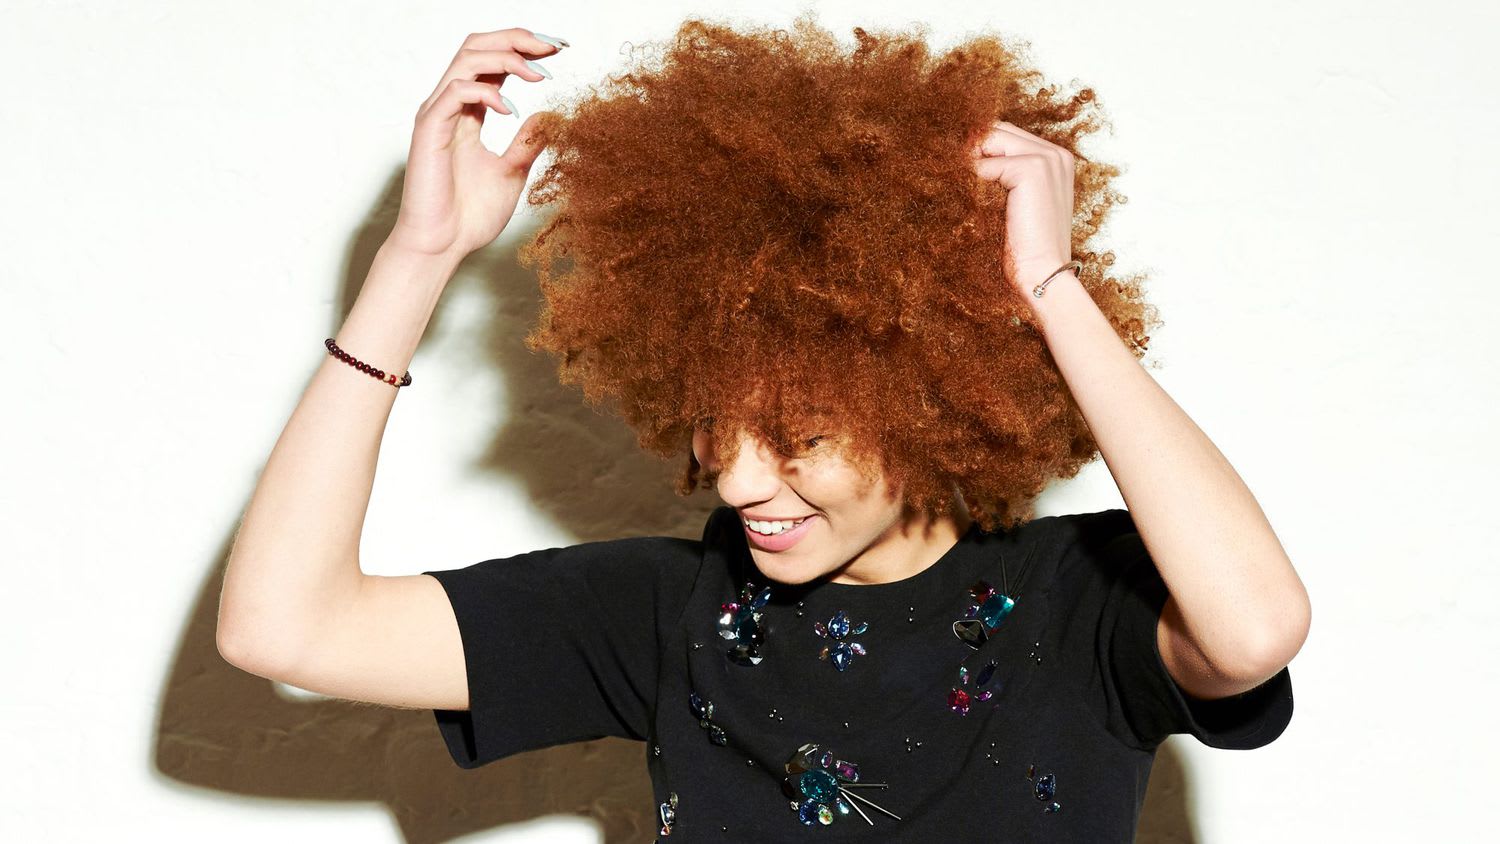 10 Easy Hacks for Maintaining Natural Hair at Home, According to Hairstylists